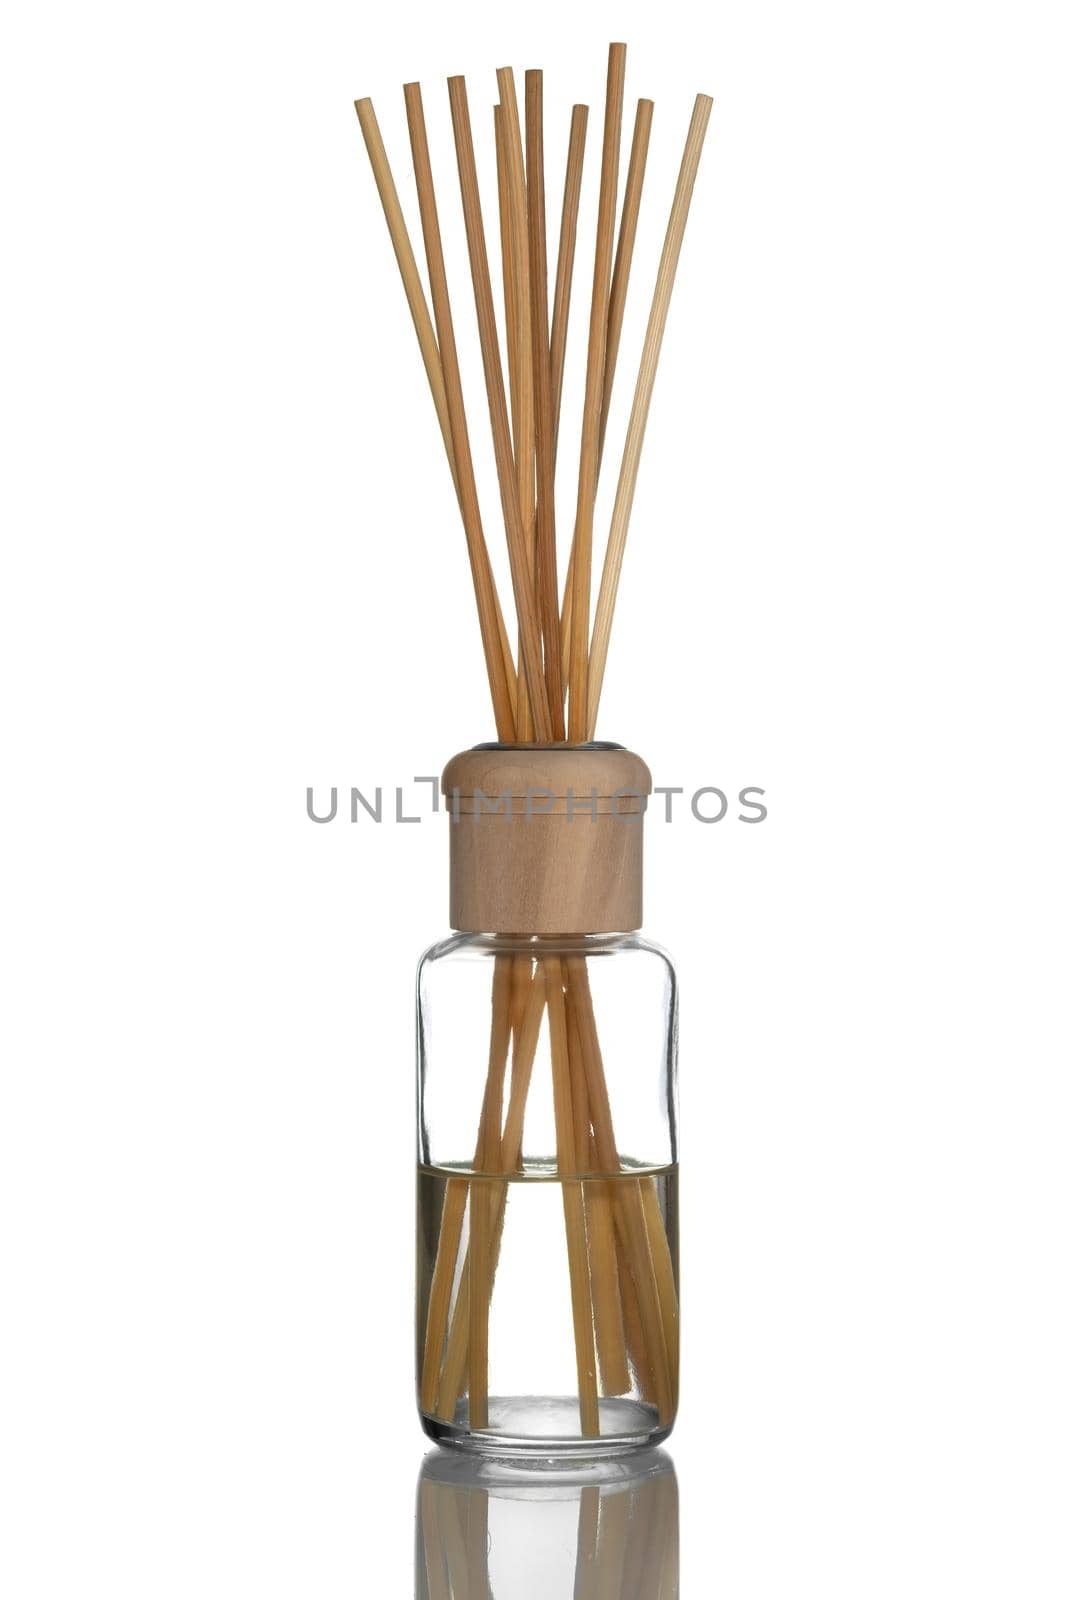 Home fragrance diffuser with wooden sticks on white background by Fischeron